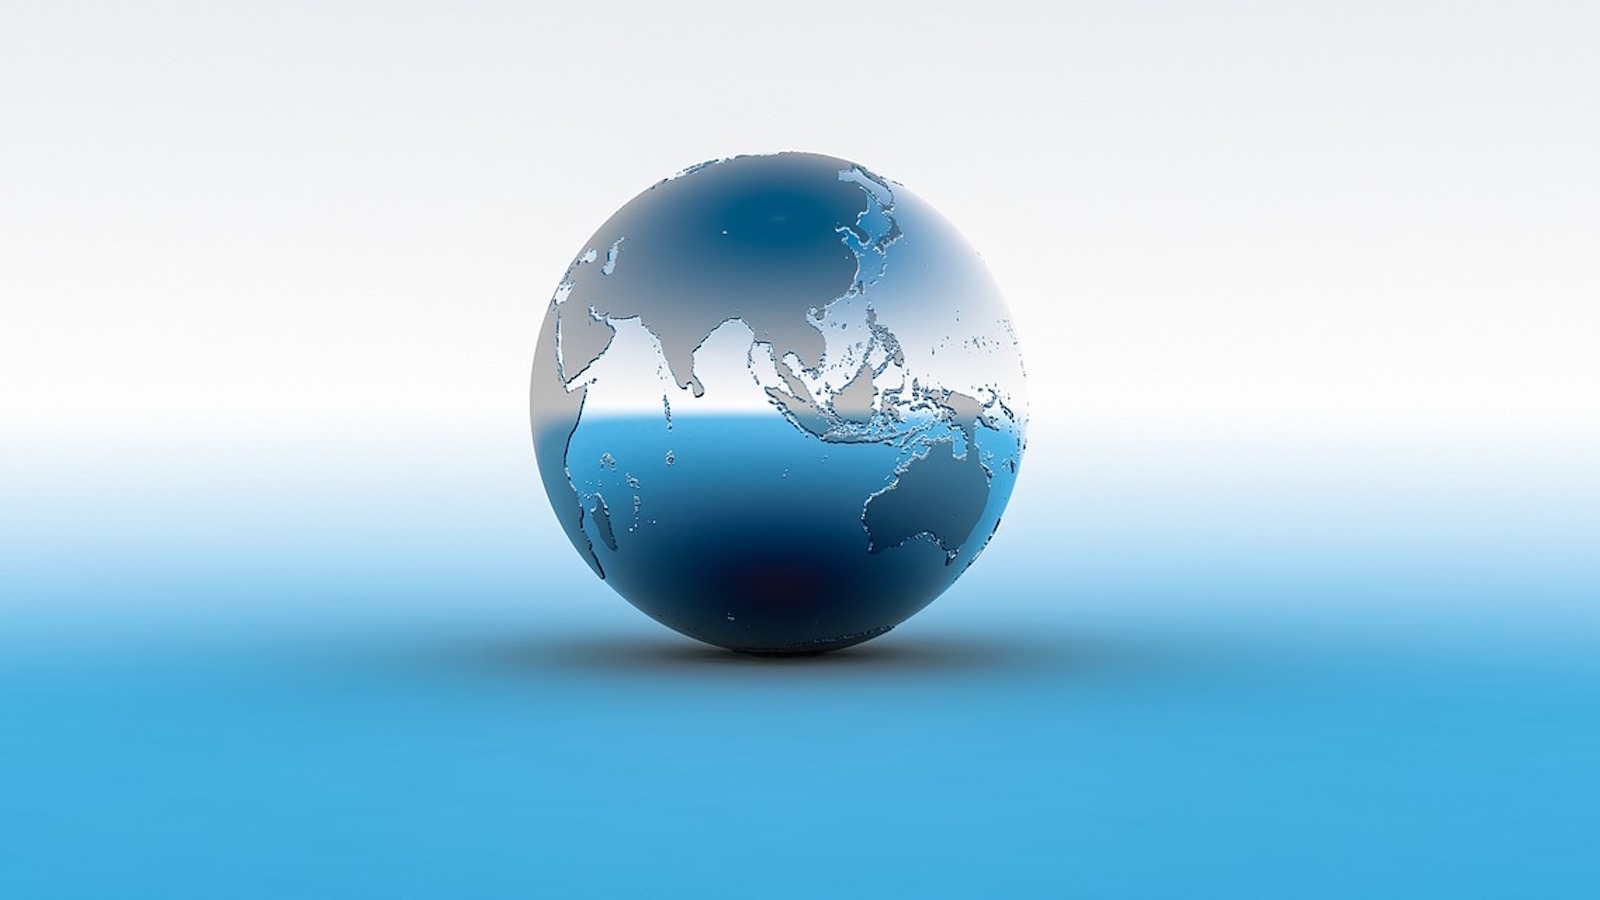 A picture of a globe on a blue background